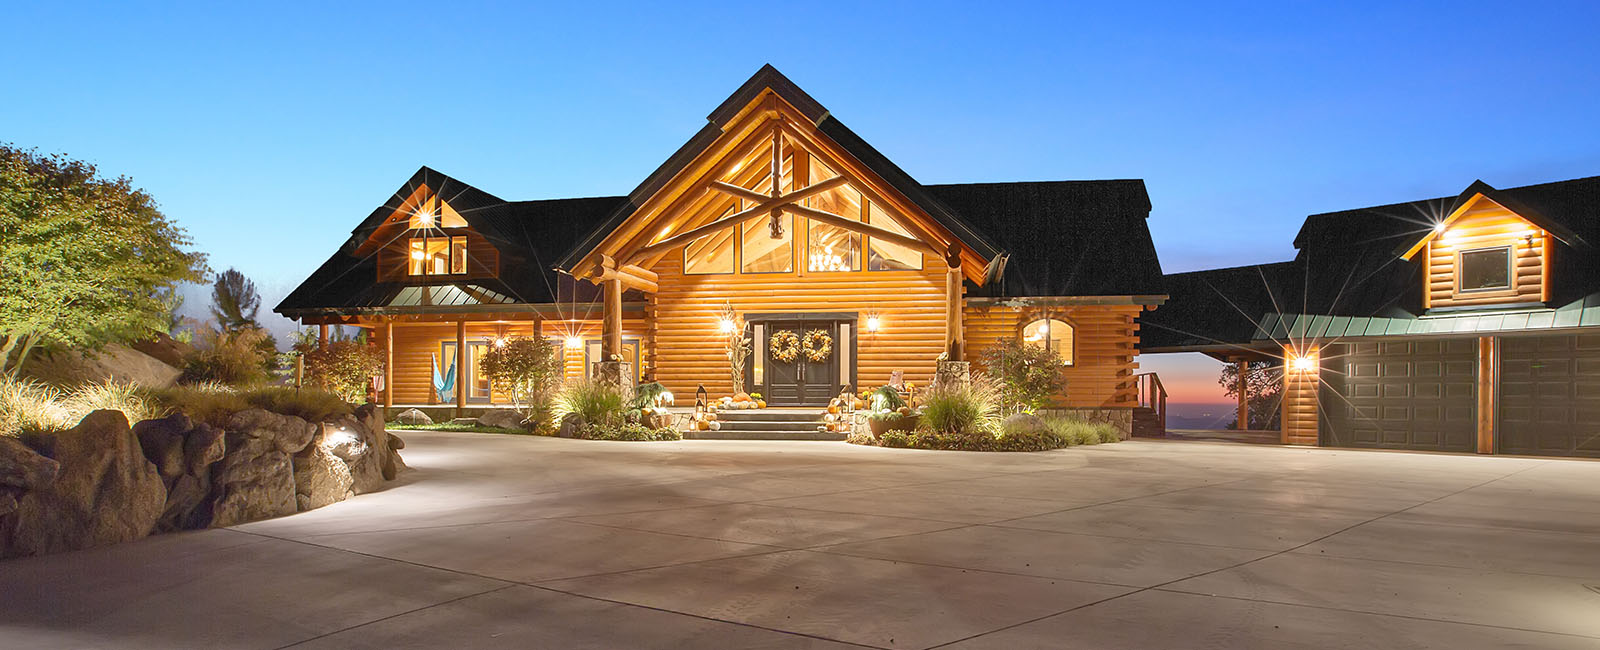 Outdoor Lighting for the Log Home